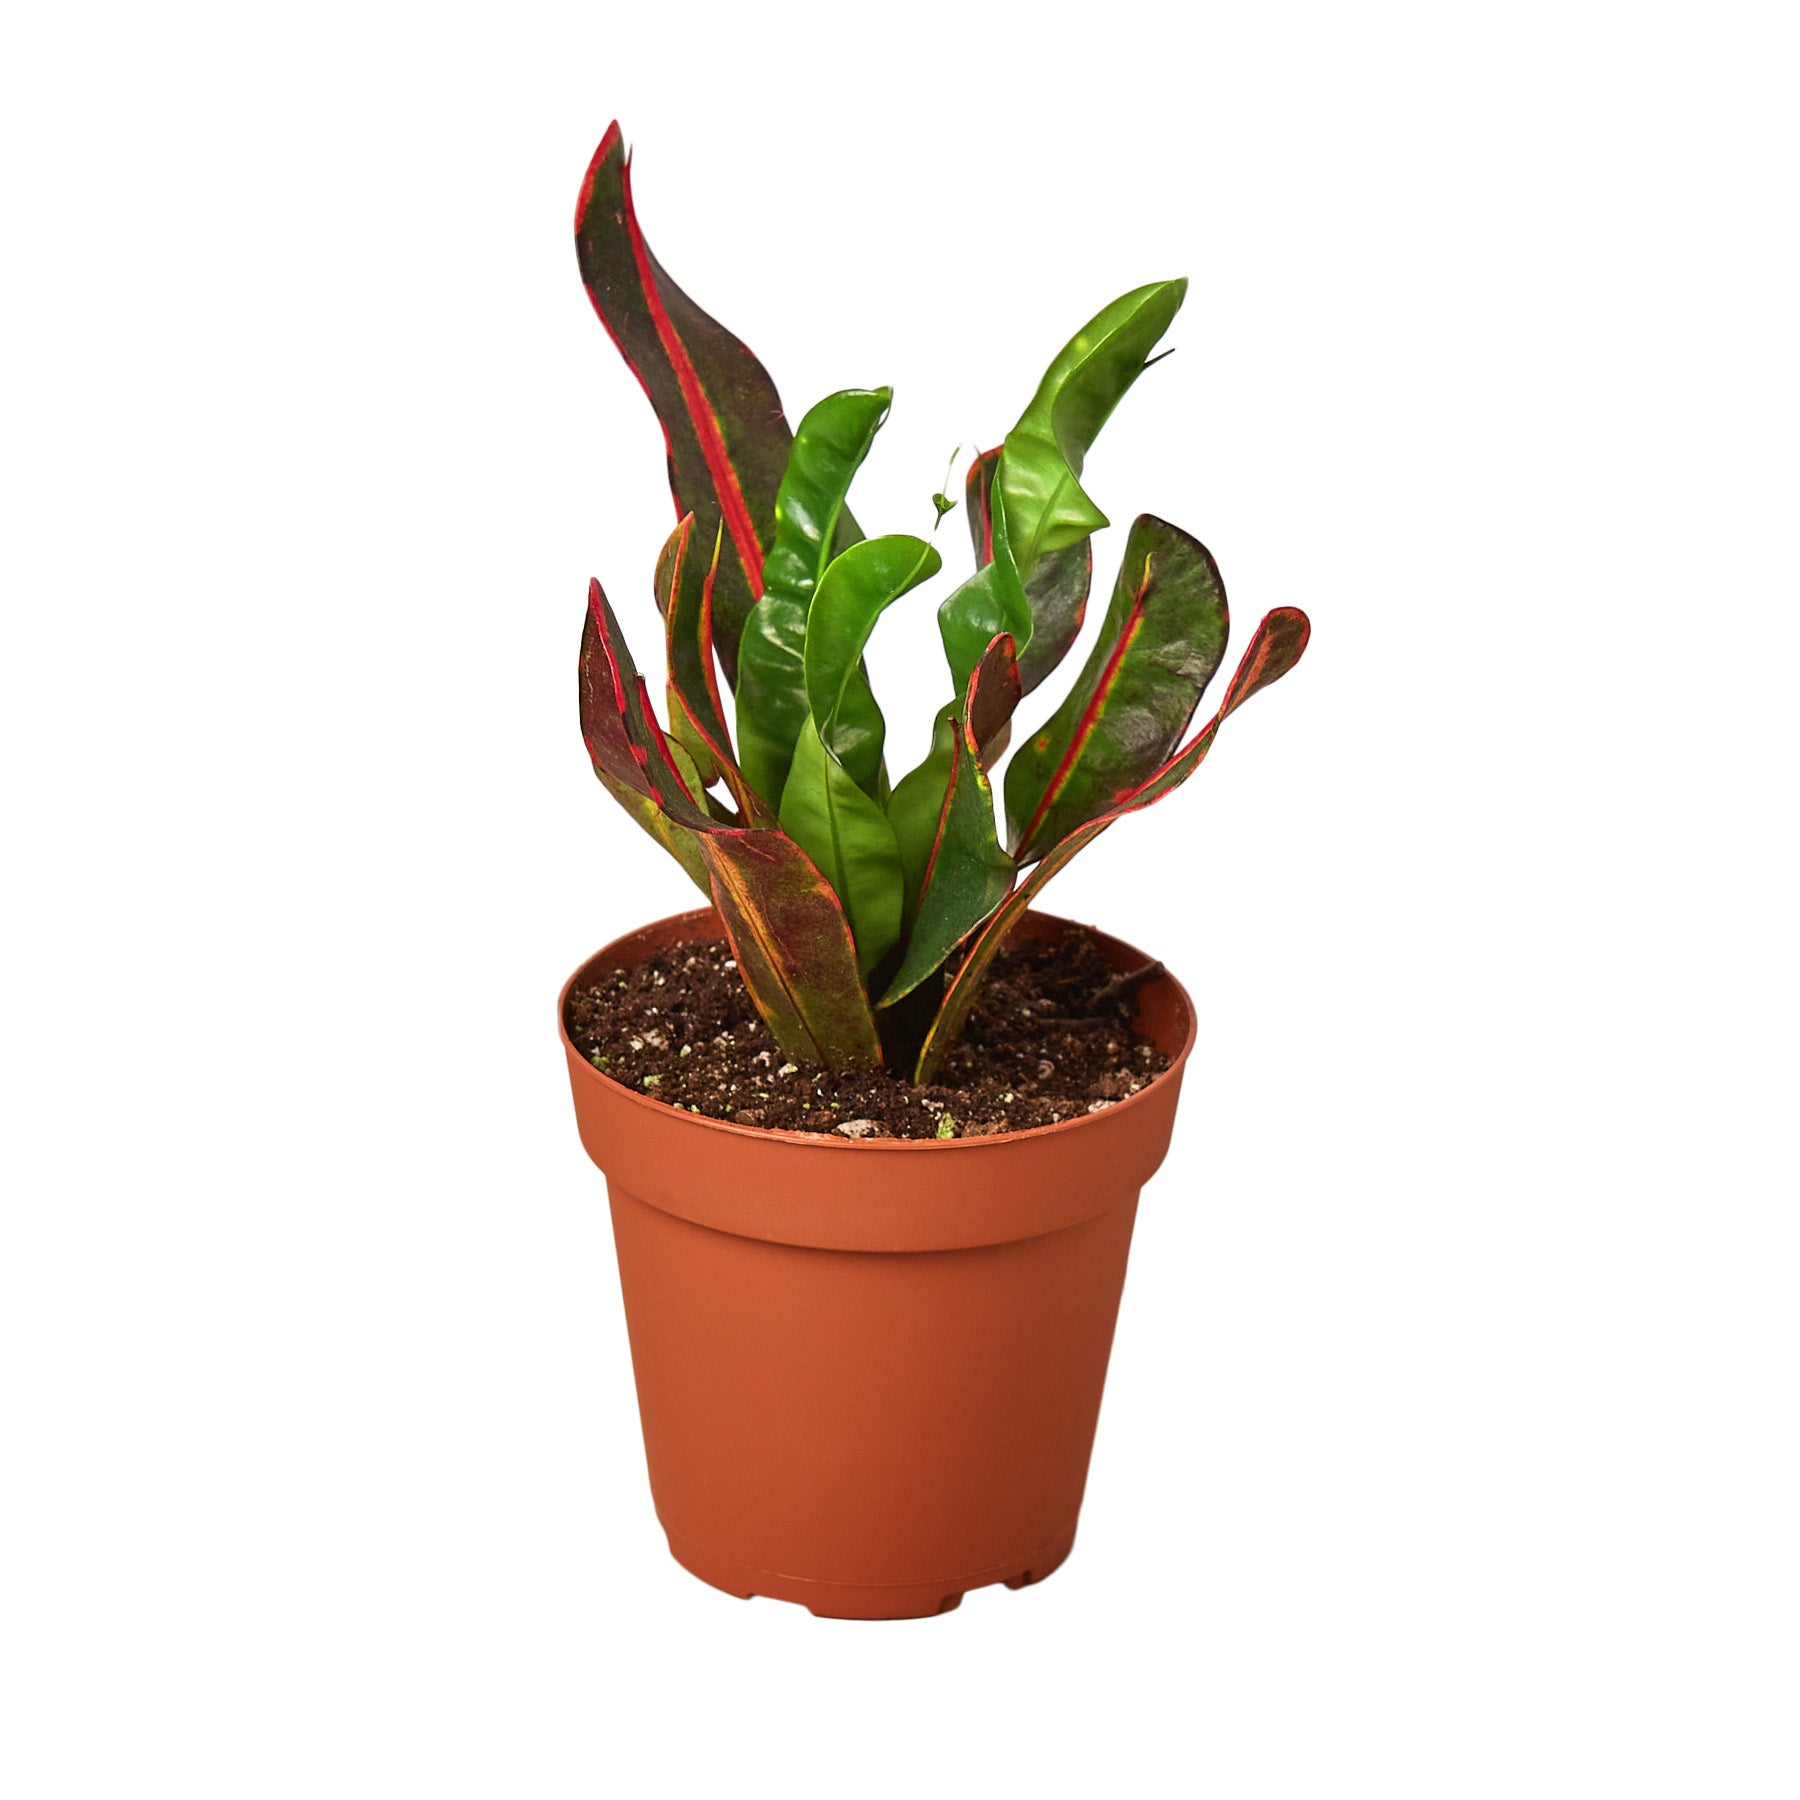 A vibrant potted plant with red and green leaves.